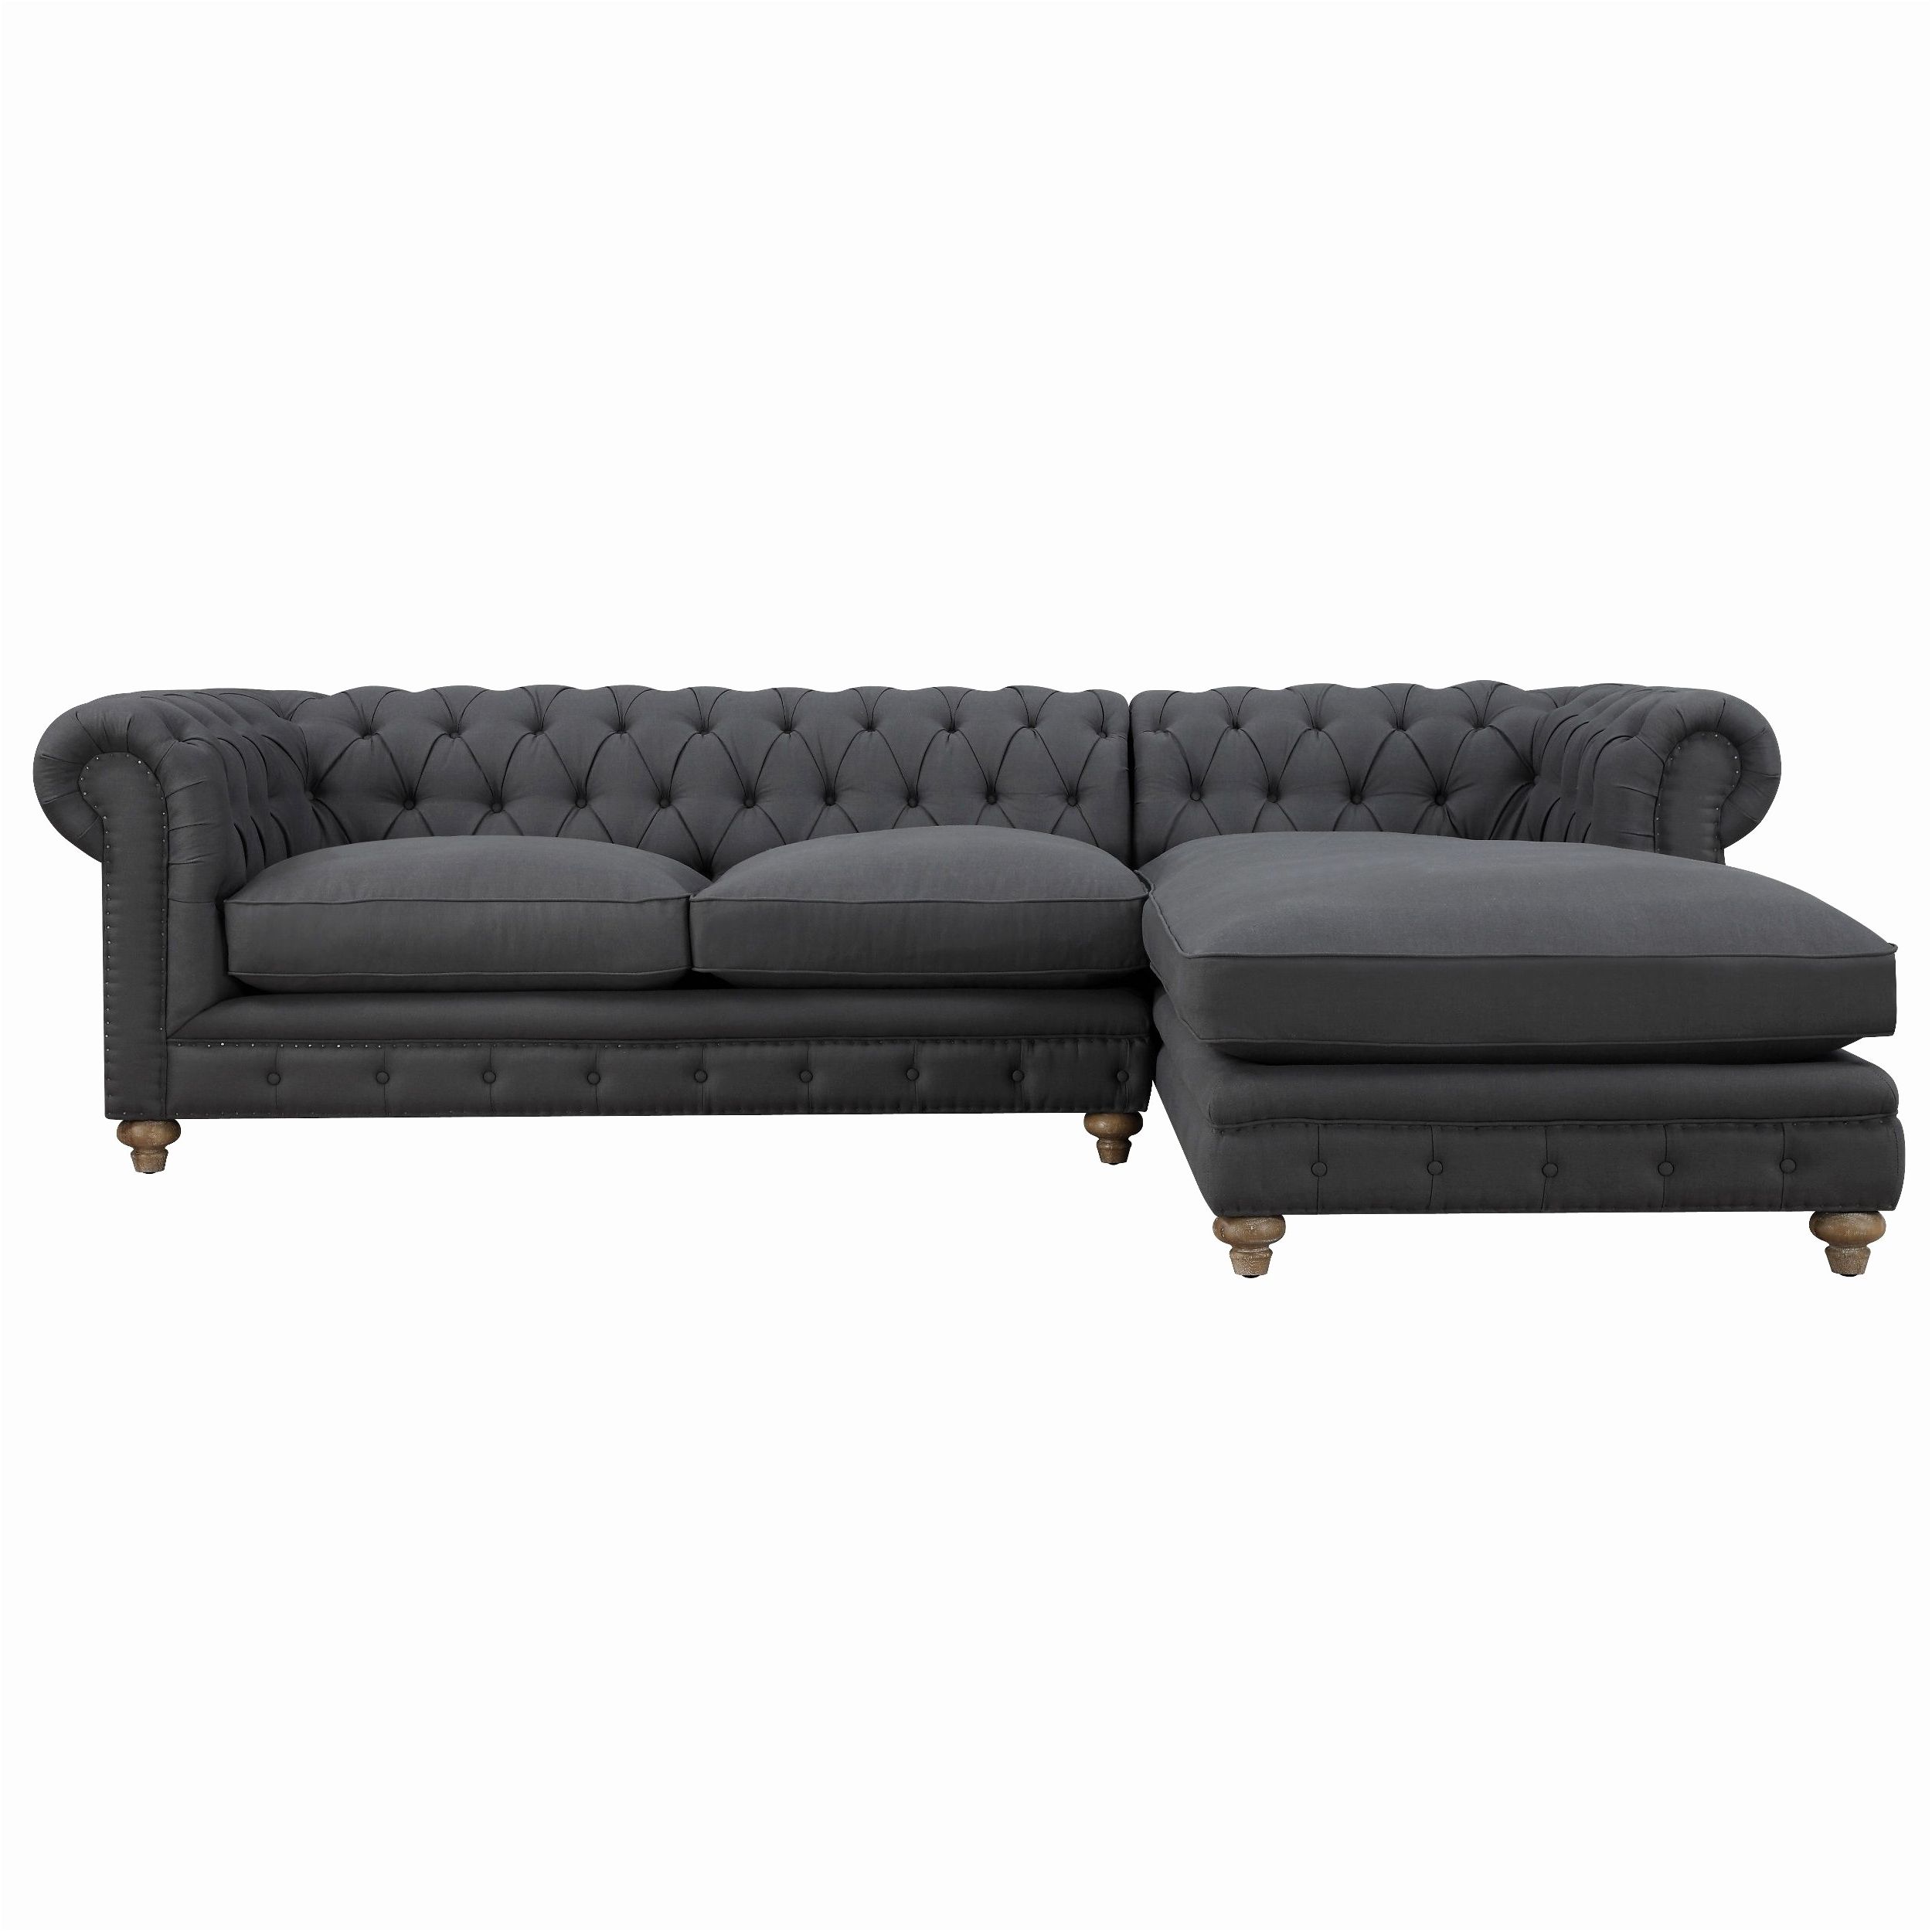 Fresh Sears Leather Sofa New – Intuisiblog Regarding Recent Sears Sofas (View 6 of 15)